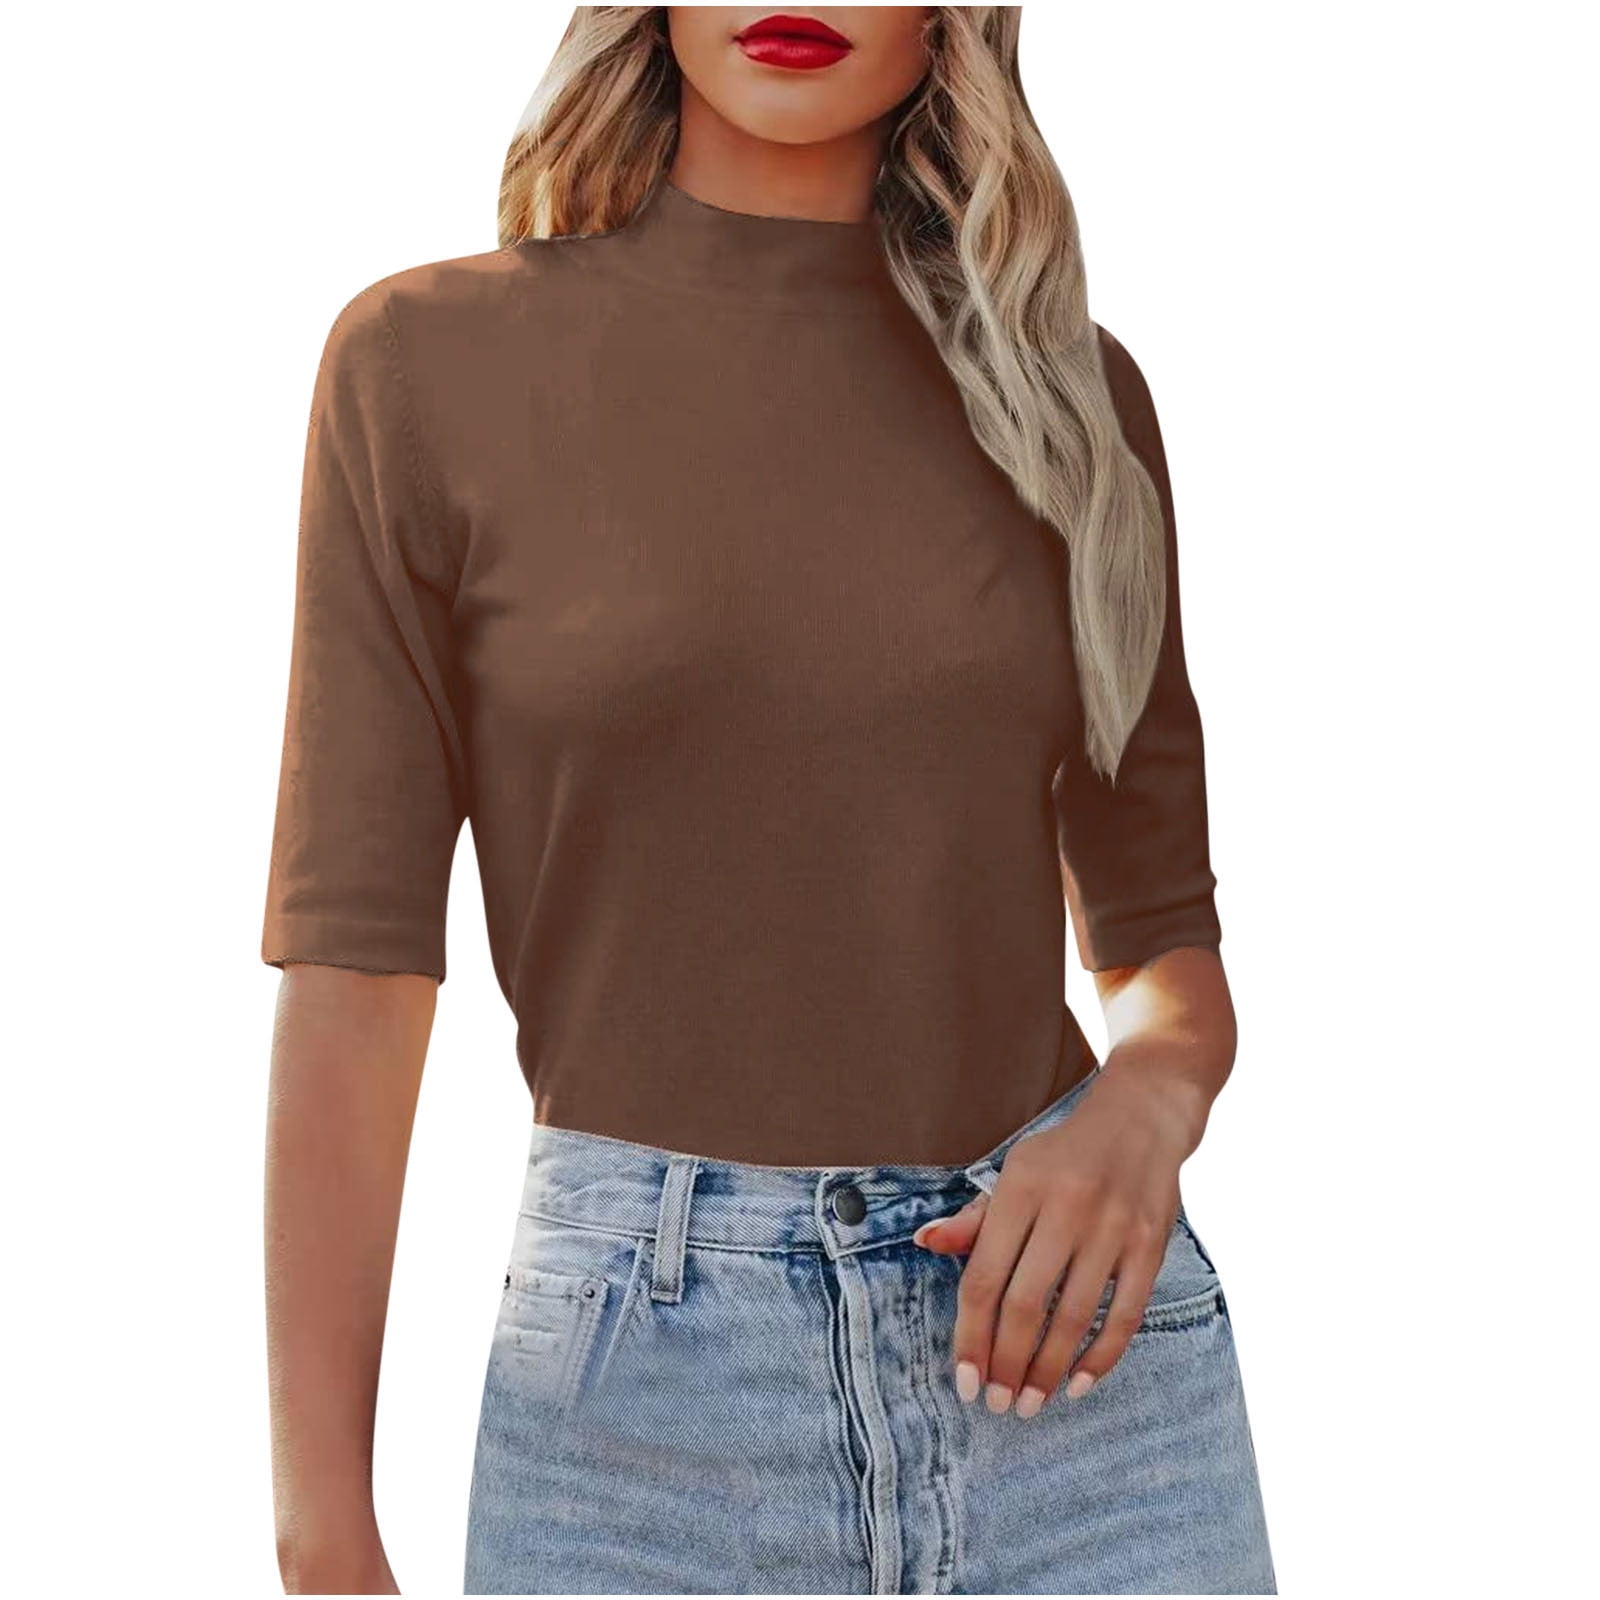 YYDGH Women's Mock Neck Half Sleeve Tops Slim Fit Ribbed Knit Tee T-Shirts  Casual Summer Turtleneck Business Tops Brown XXL